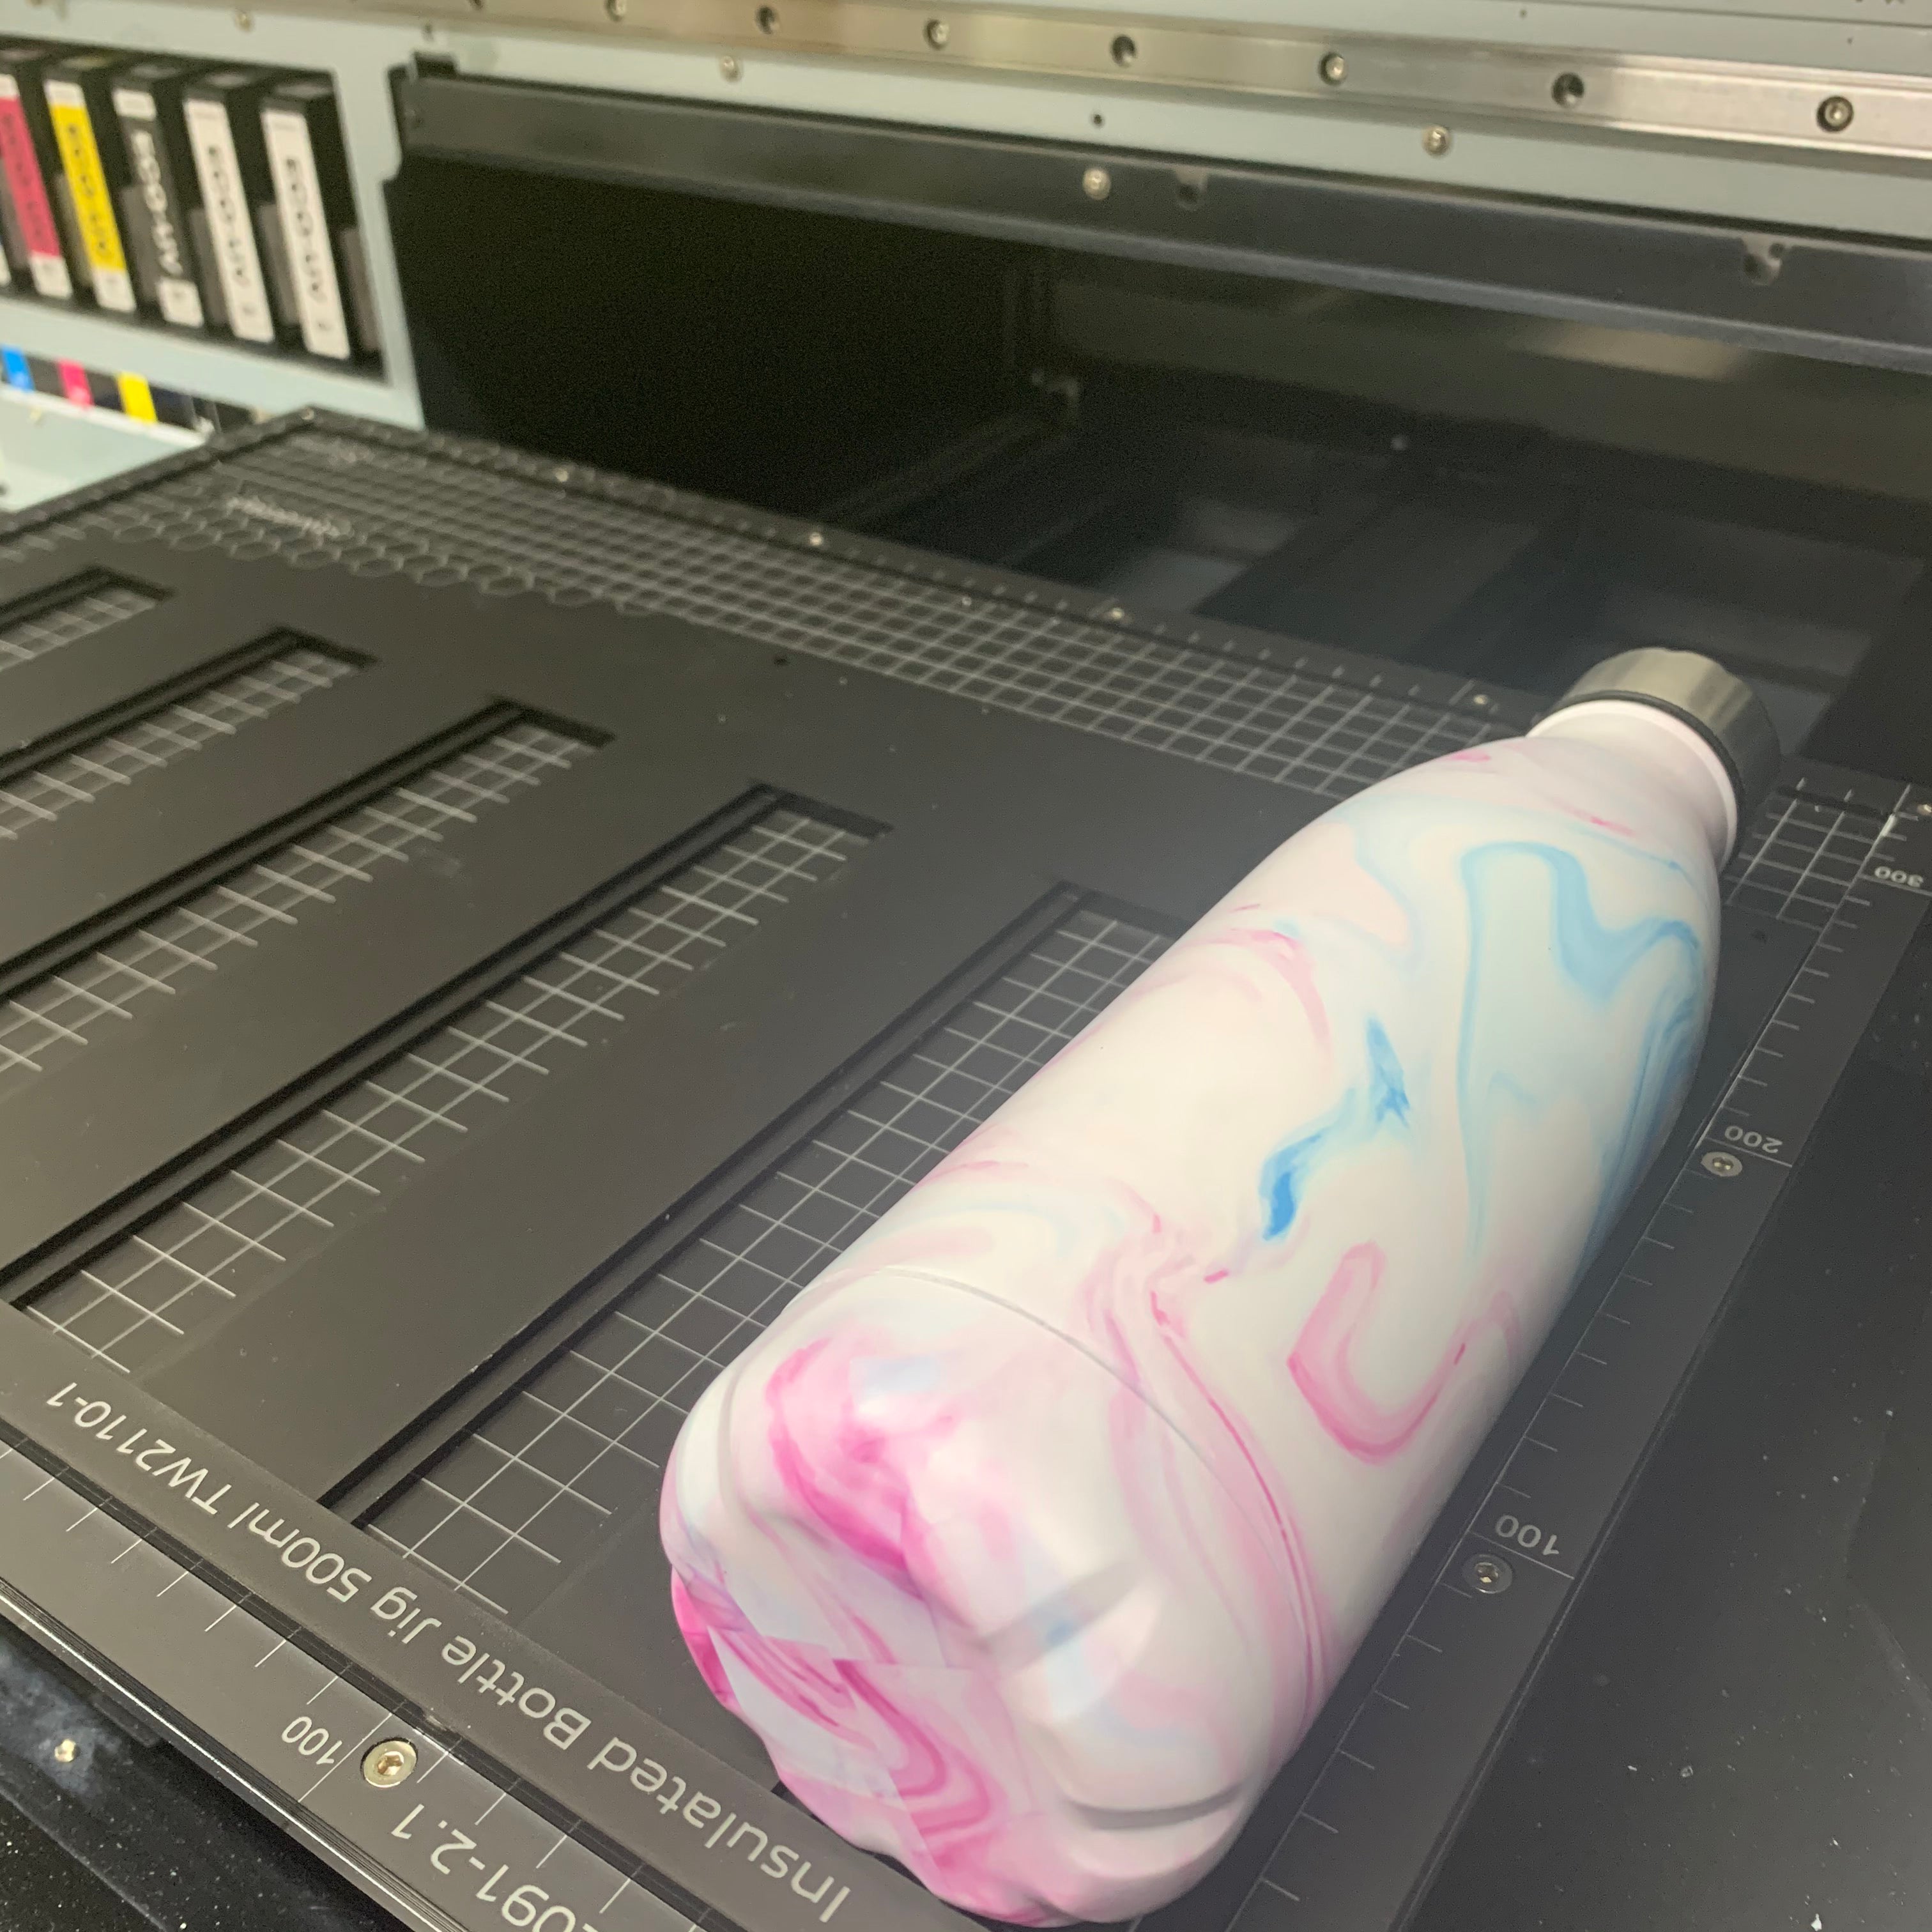 Insulated Bottle Jig for 500ml Bottles - Mutoh XPJ-661UF Flatbed Printer (xx Spaces)